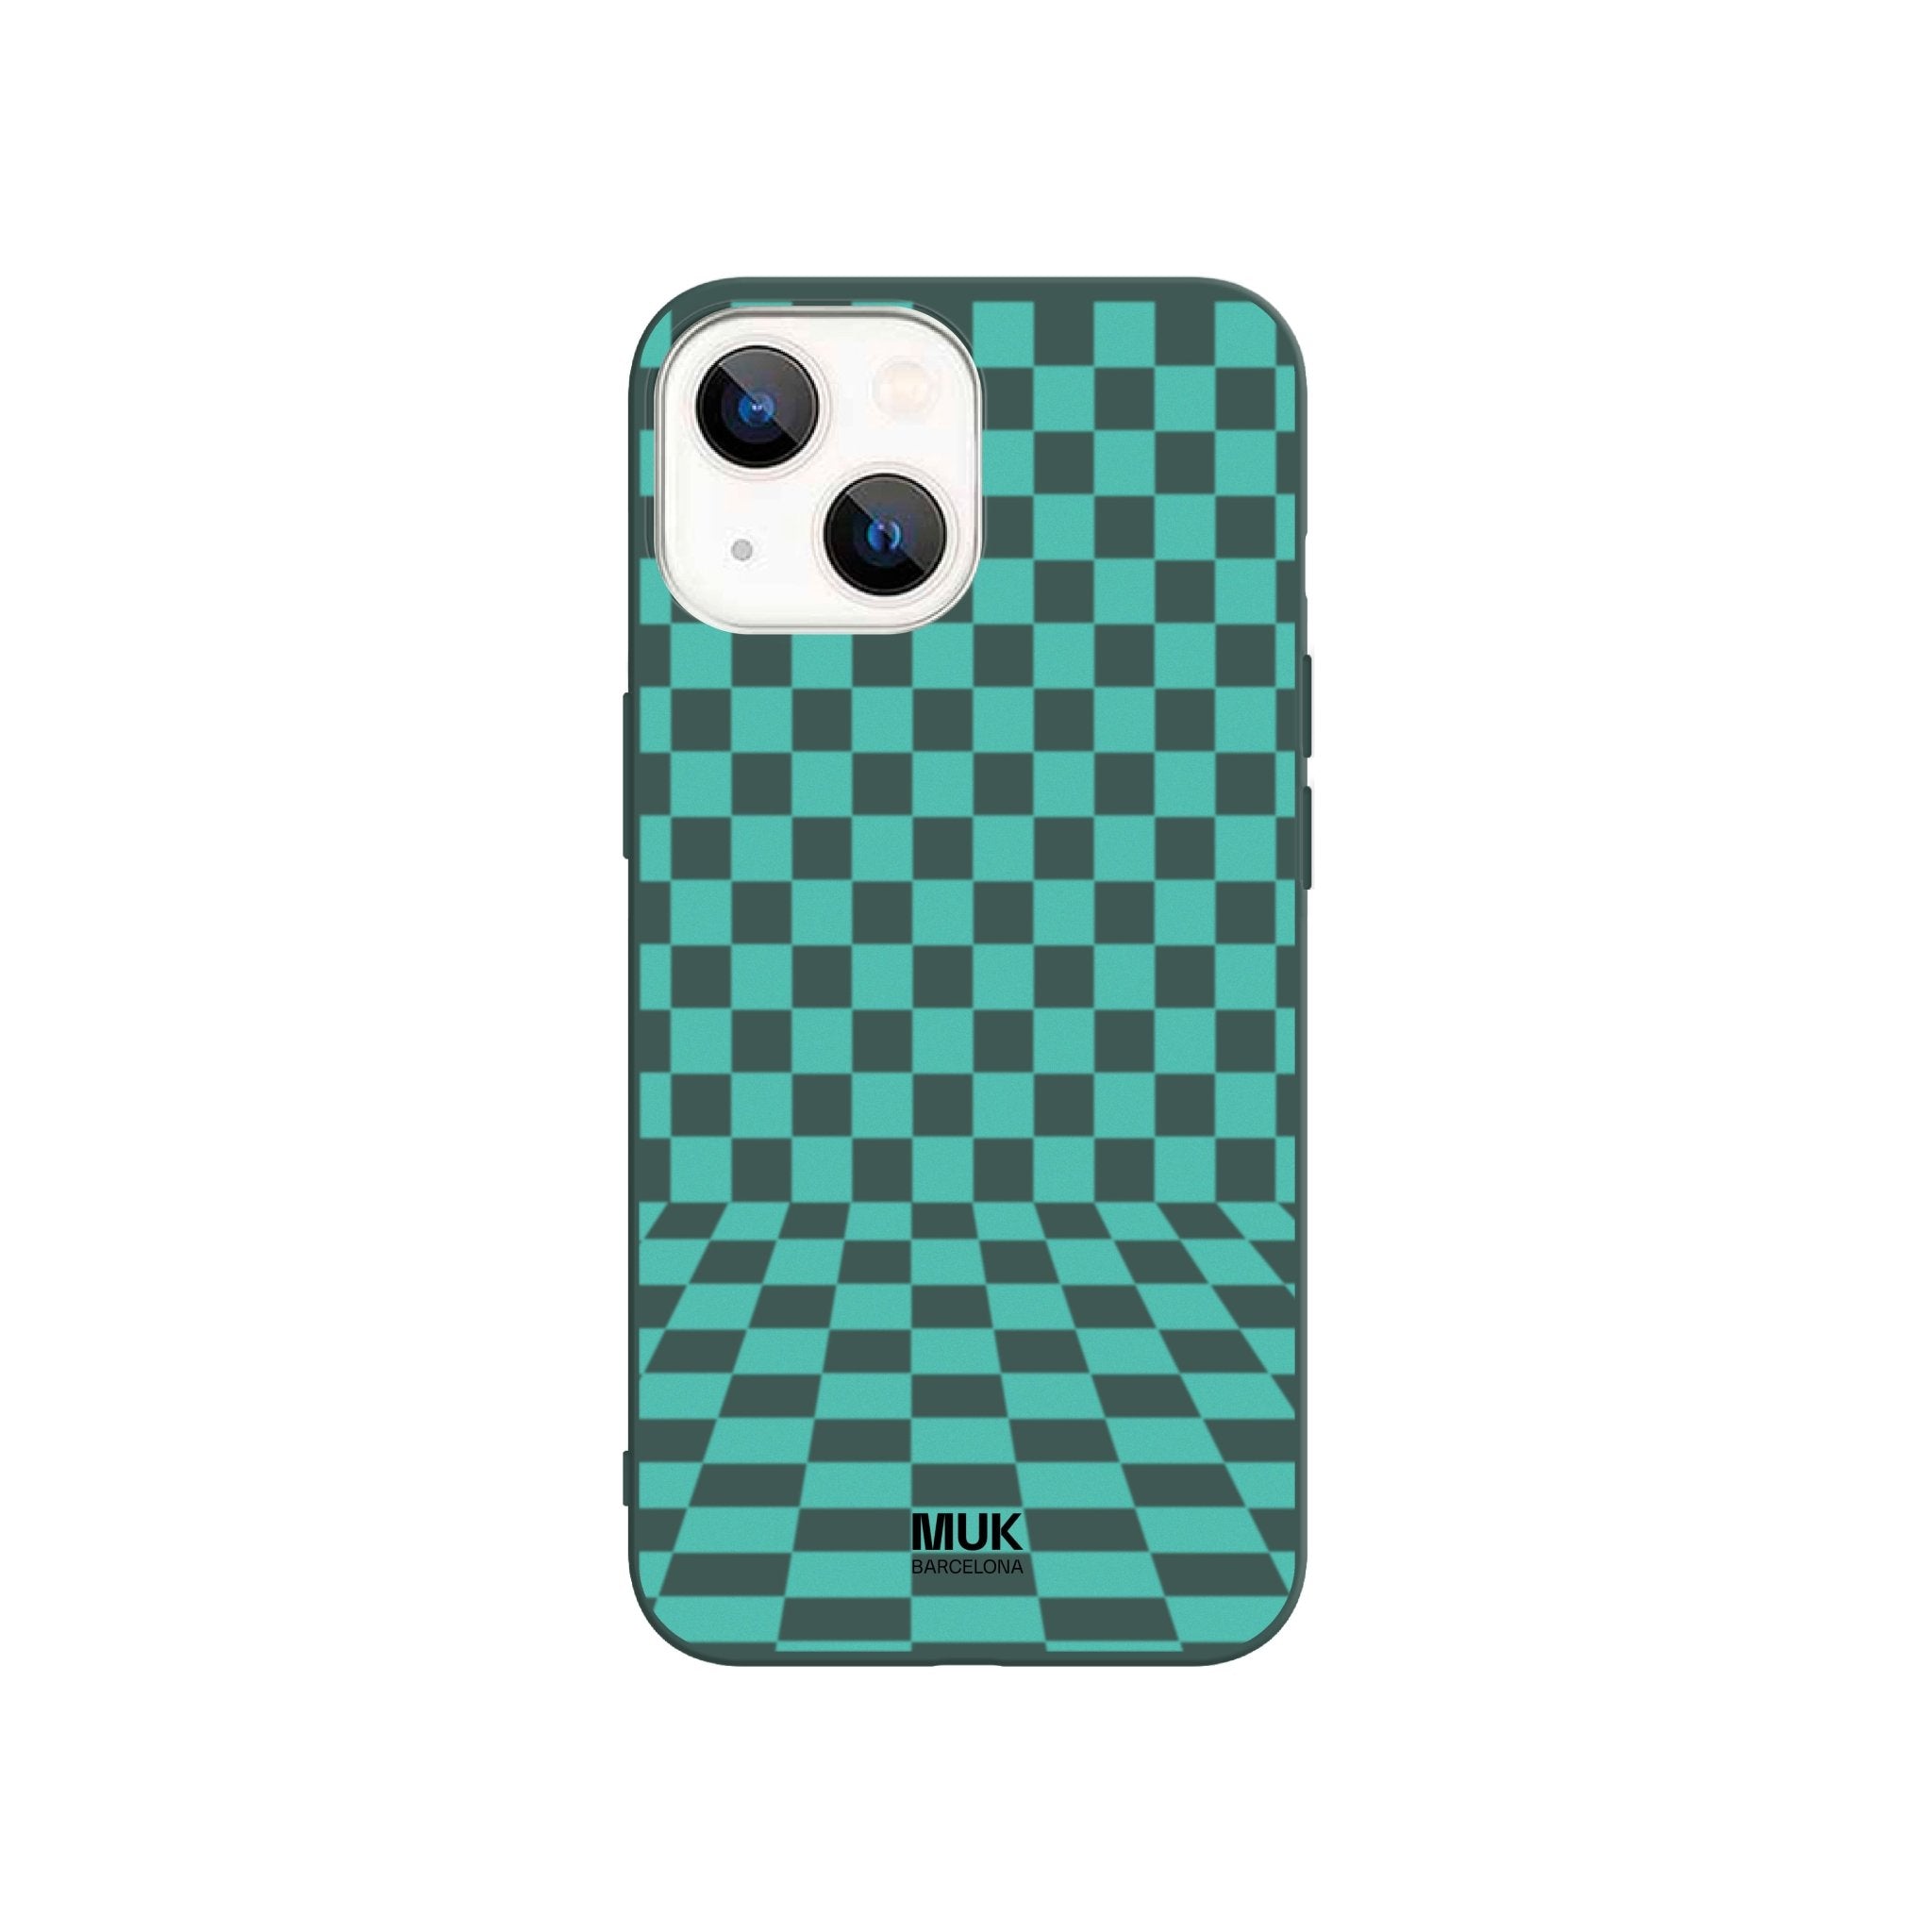 Lagoon Phone Case With a design on it
